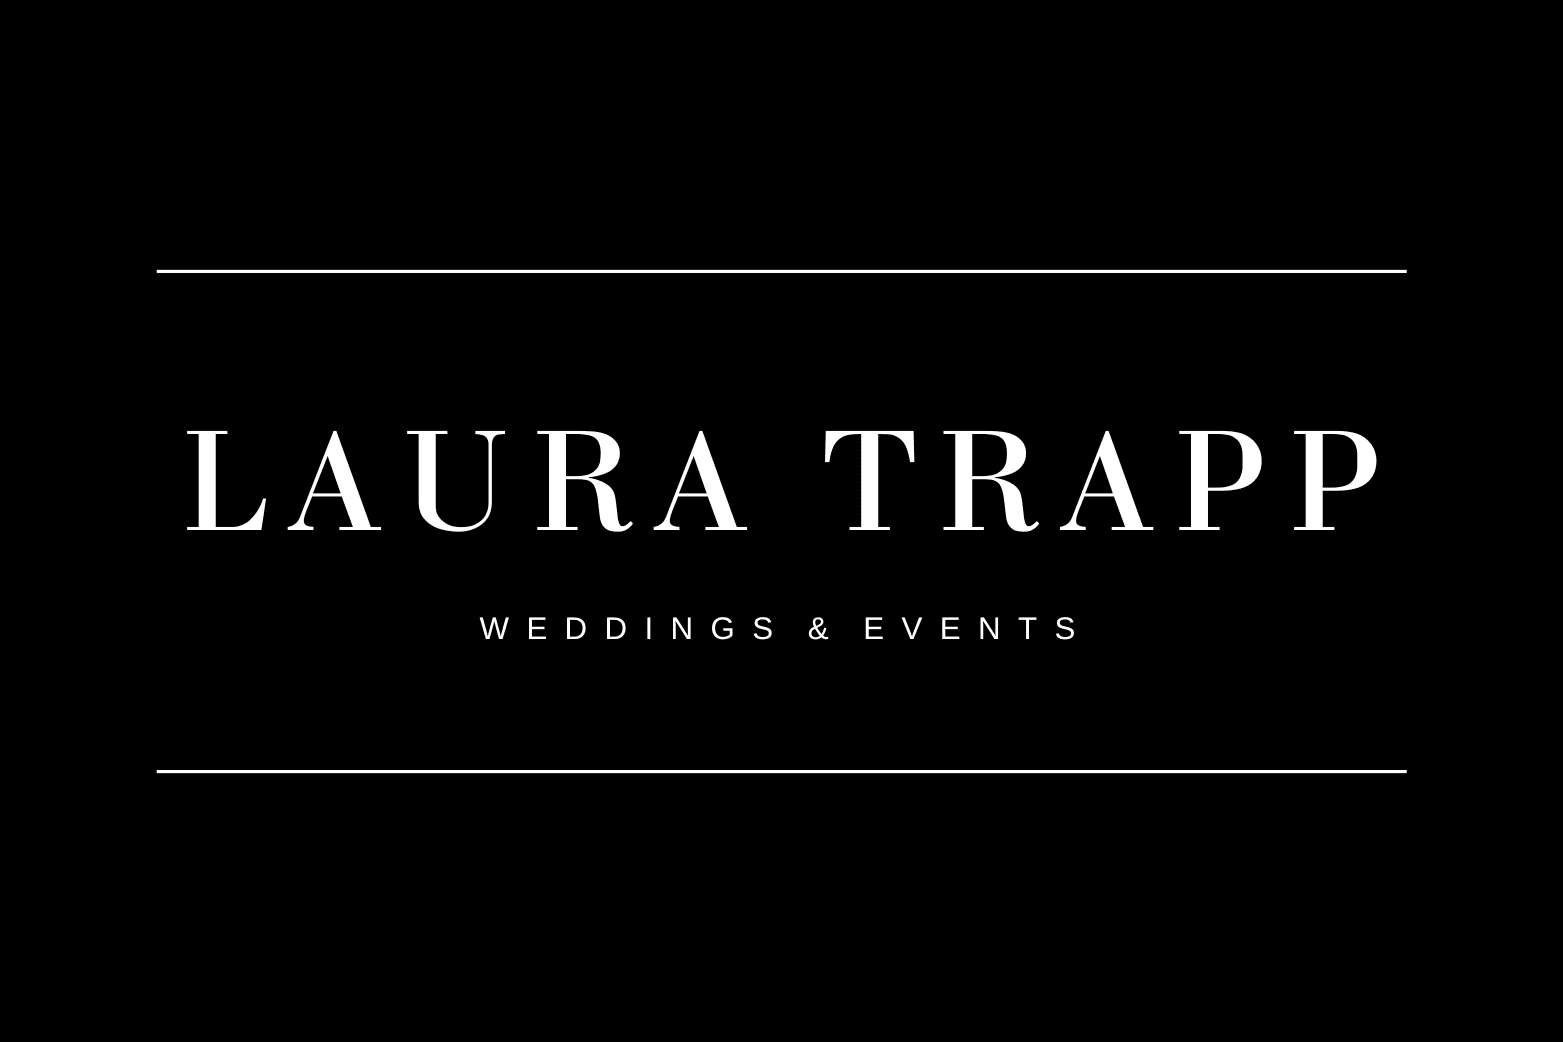 Laura Trapp - Weddings & Events - Wedding Planer in Hannover